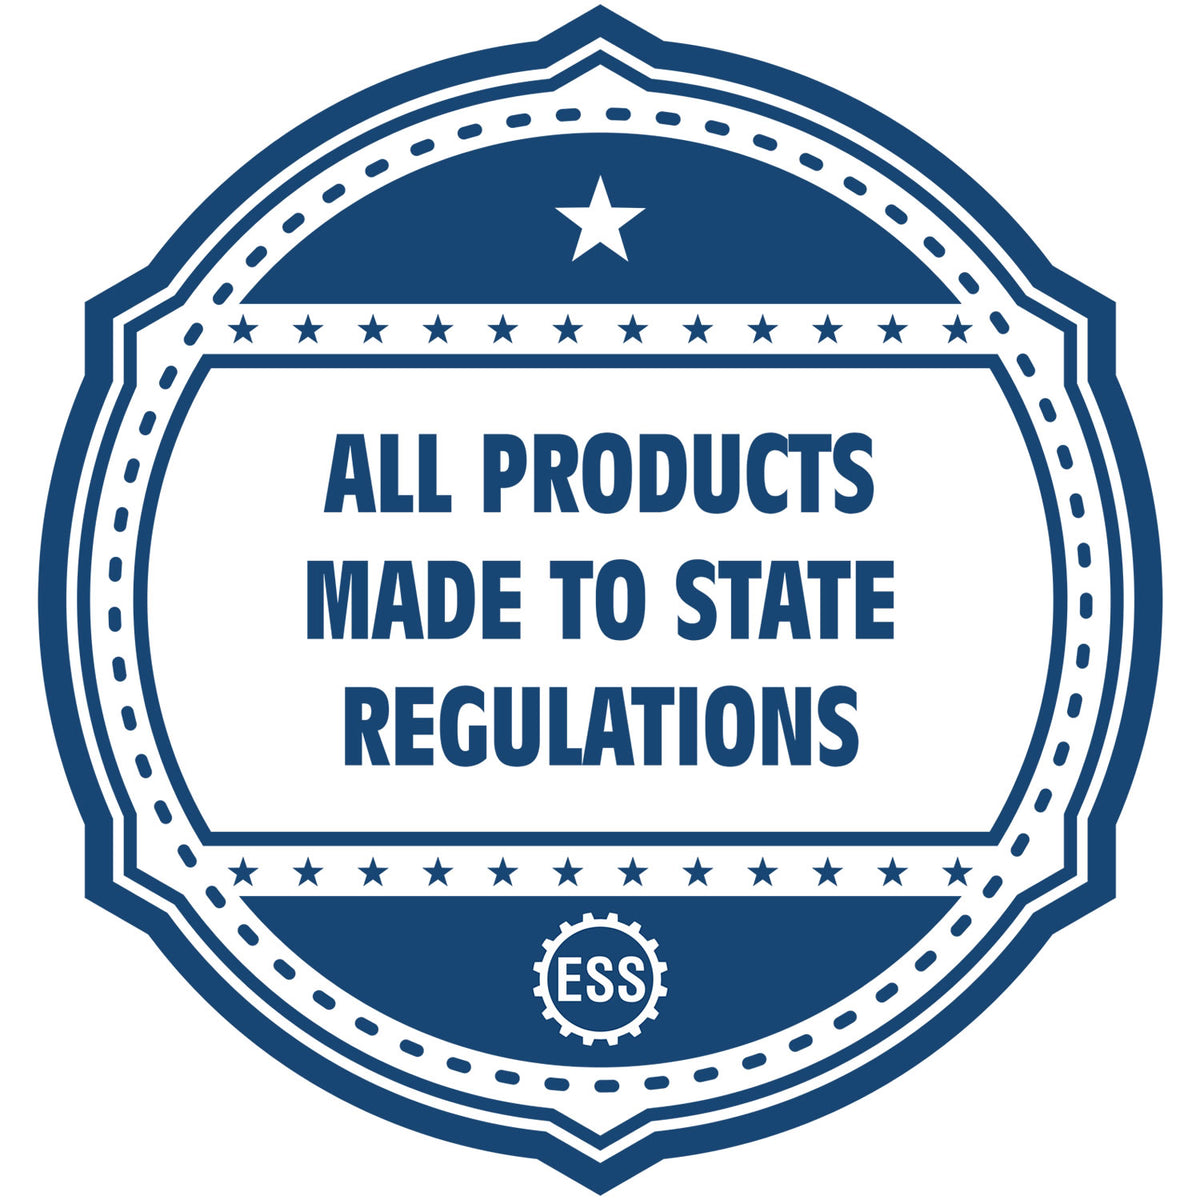 An icon or badge element for the Super Slim New Mexico Notary Public Stamp showing that this product is made in compliance with state regulations.